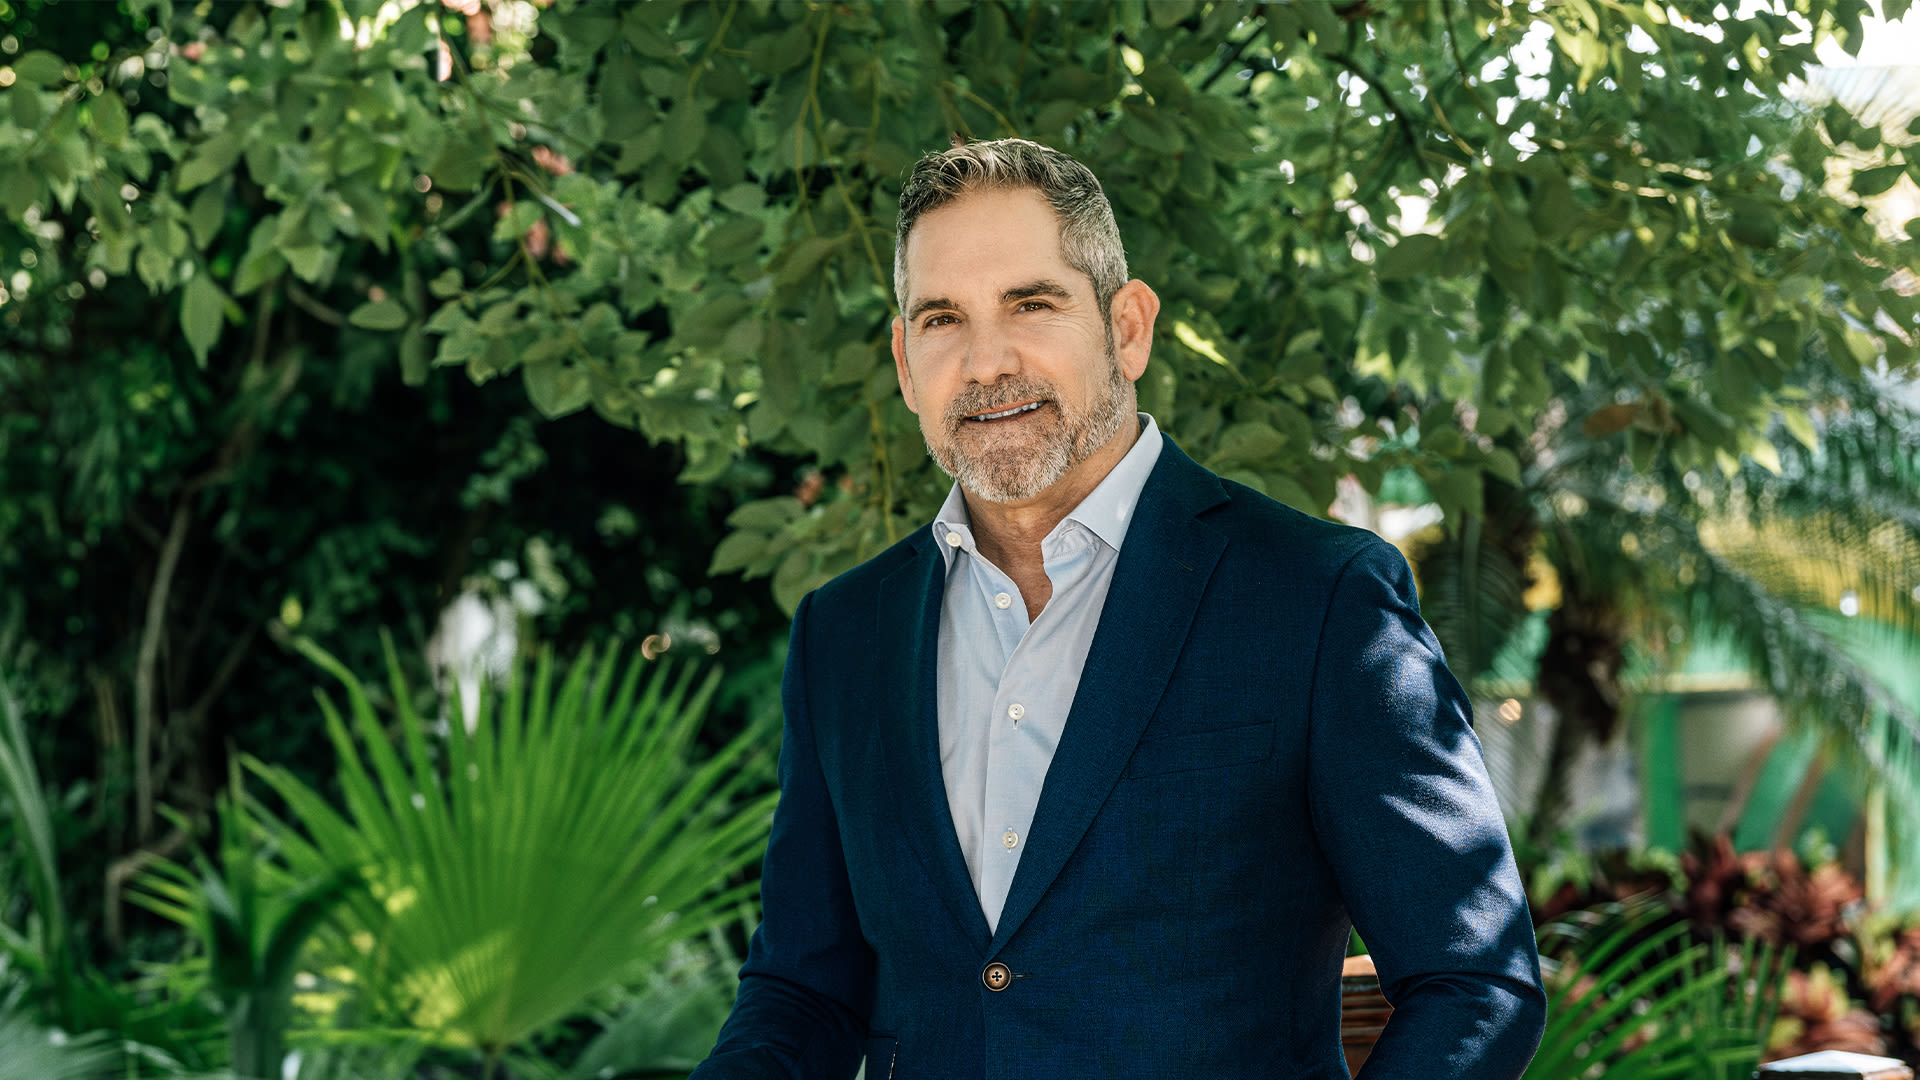 Grant Cardone’s Advice on Becoming Wealthy With Real Estate